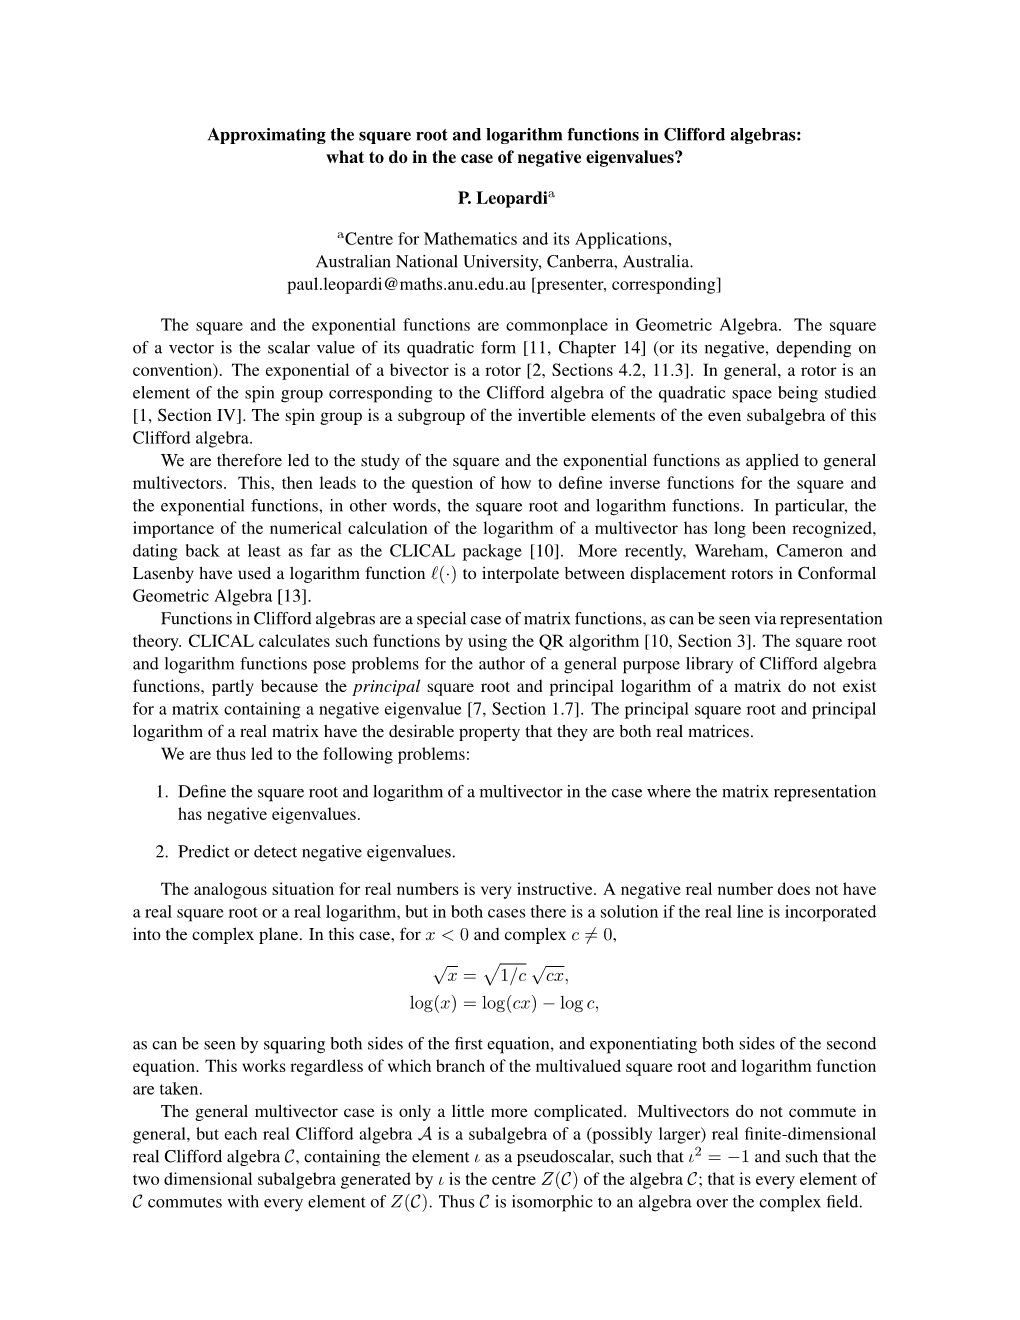 Approximating the Square Root and Logarithm Functions in Clifford Algebras: What to Do in the Case of Negative Eigenvalues?